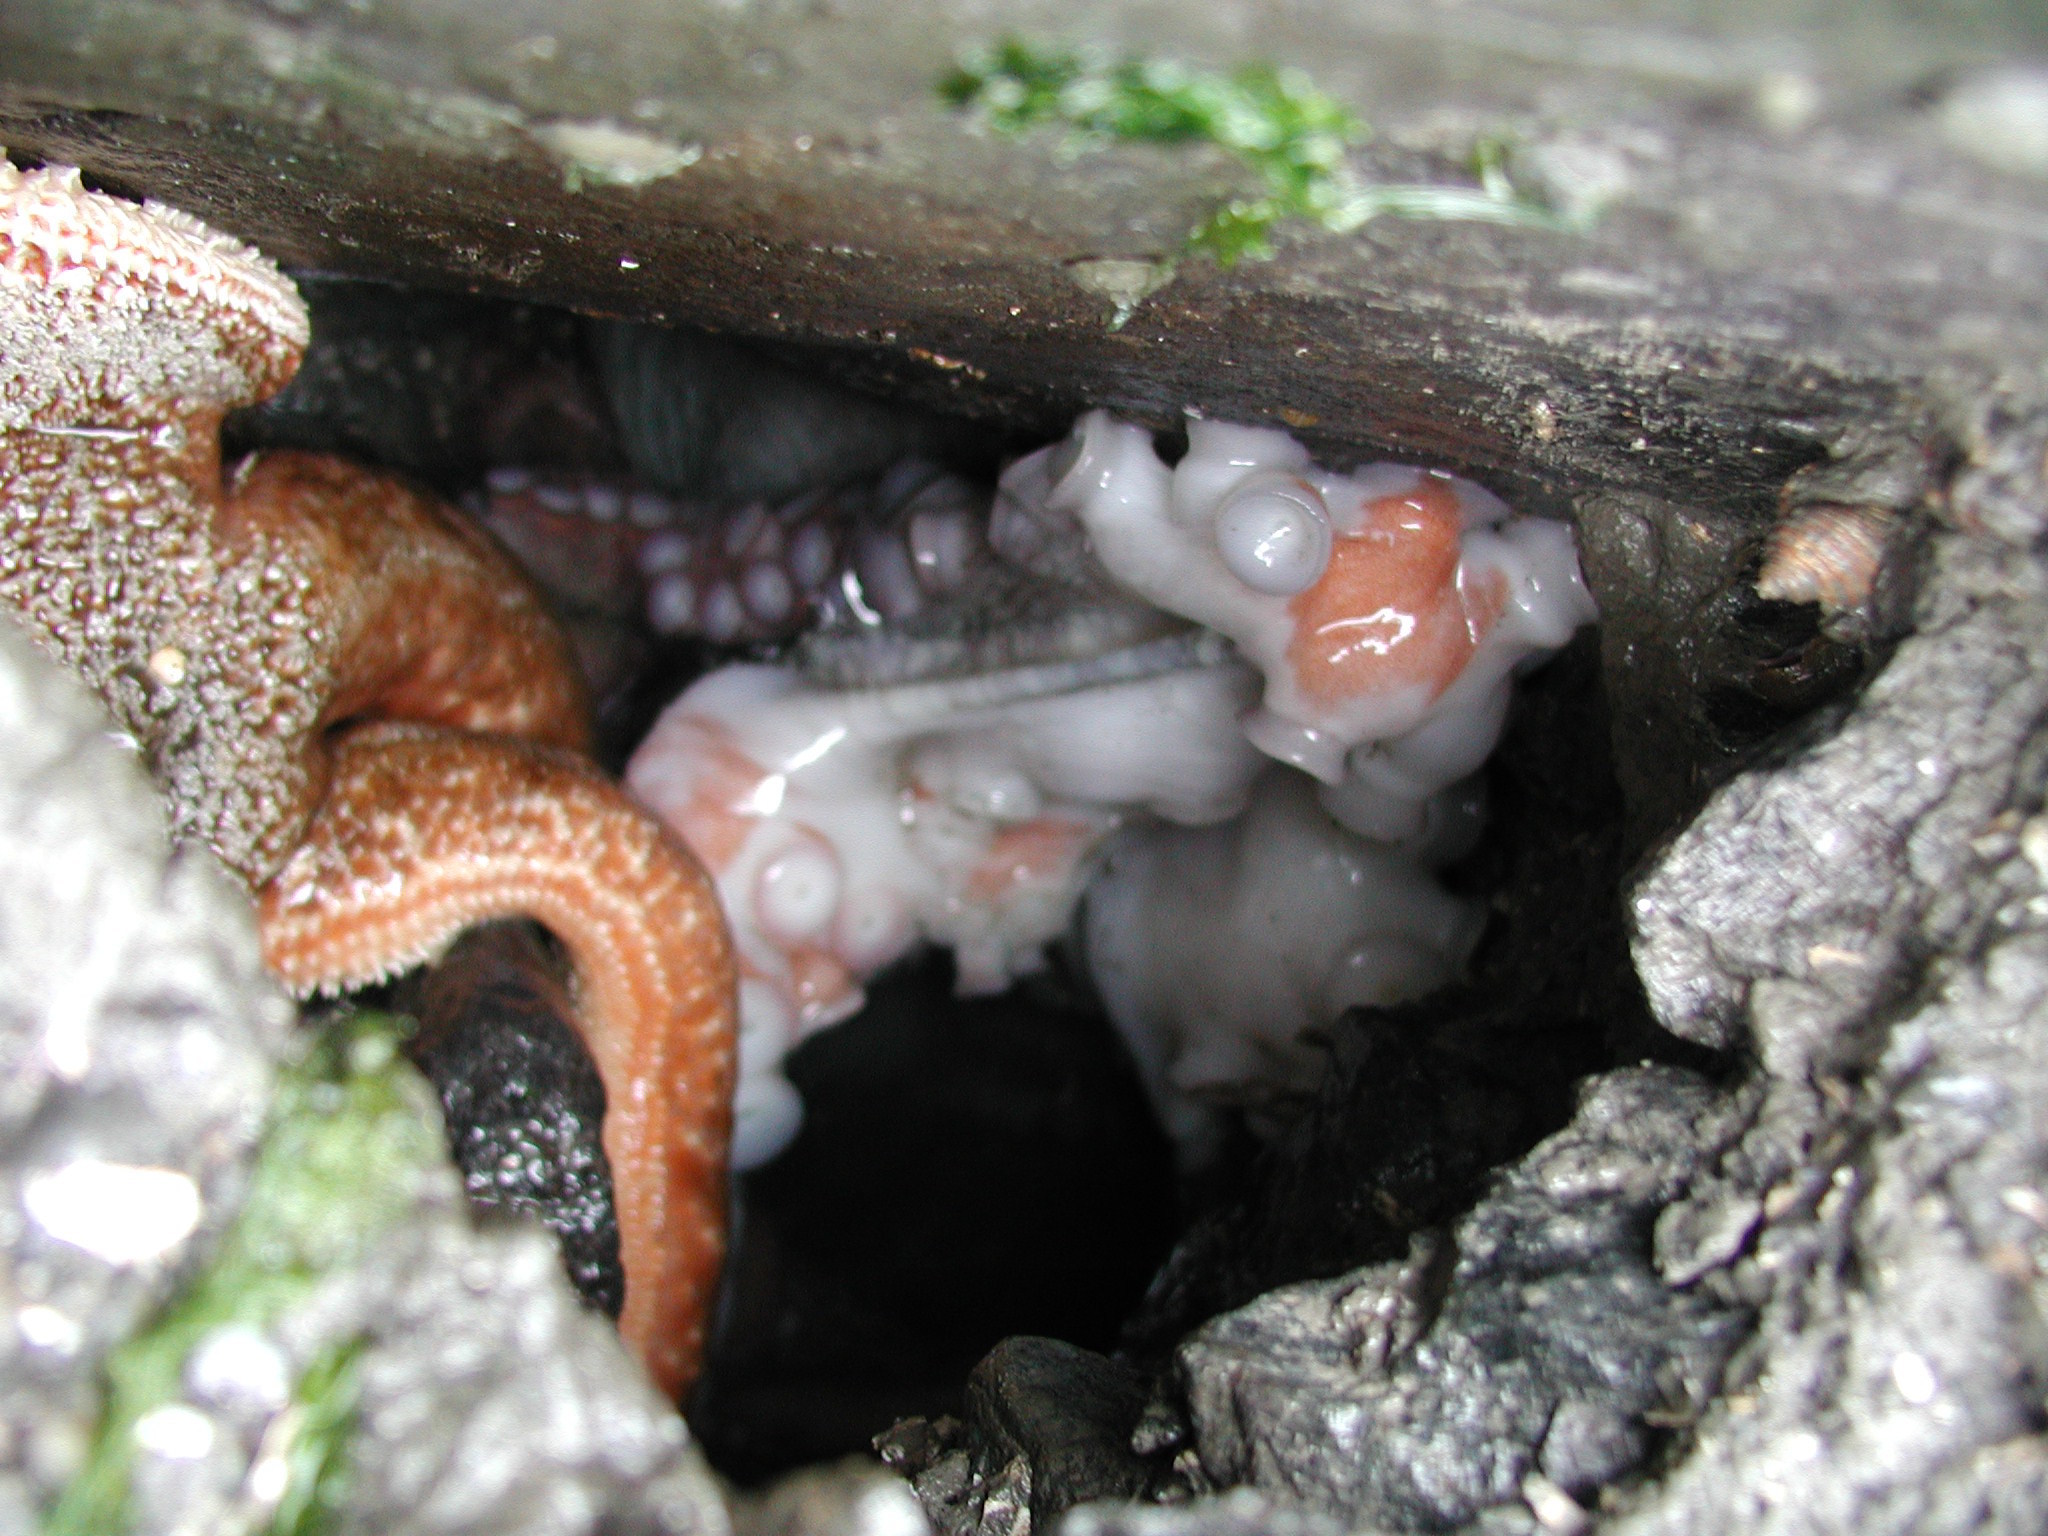 Image of Giant Pacific Octopus